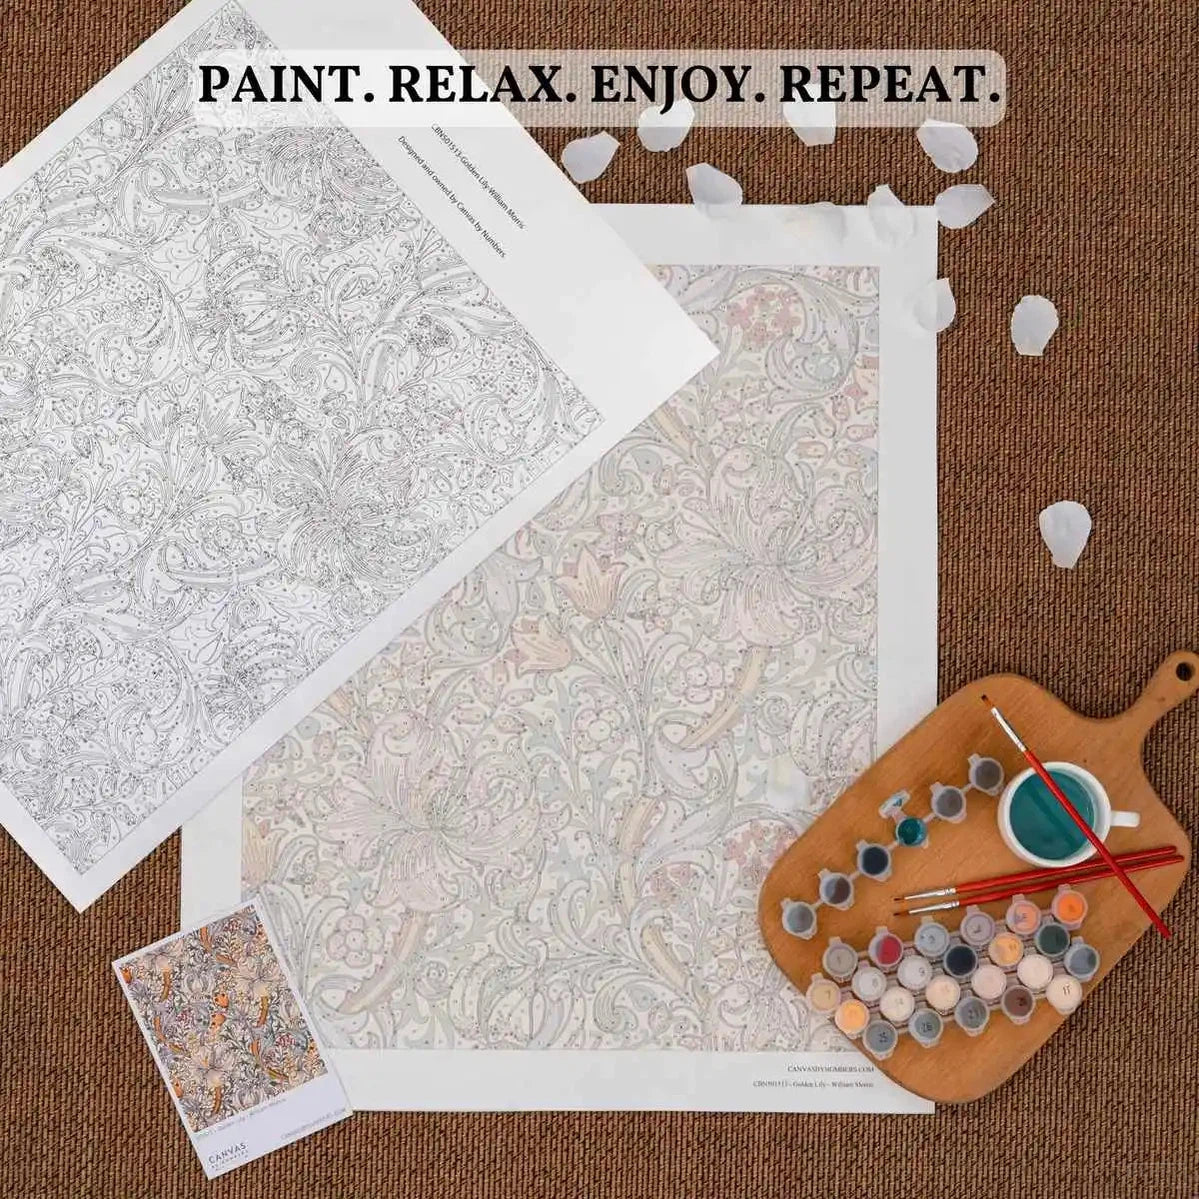 Coastal Calm - Paint by Numbers-A captivating paint by numbers kit that reflects a serene beachside scene. Perfect for all art enthusiasts looking for a unique pictorial journey.
-Canvas by Numbers